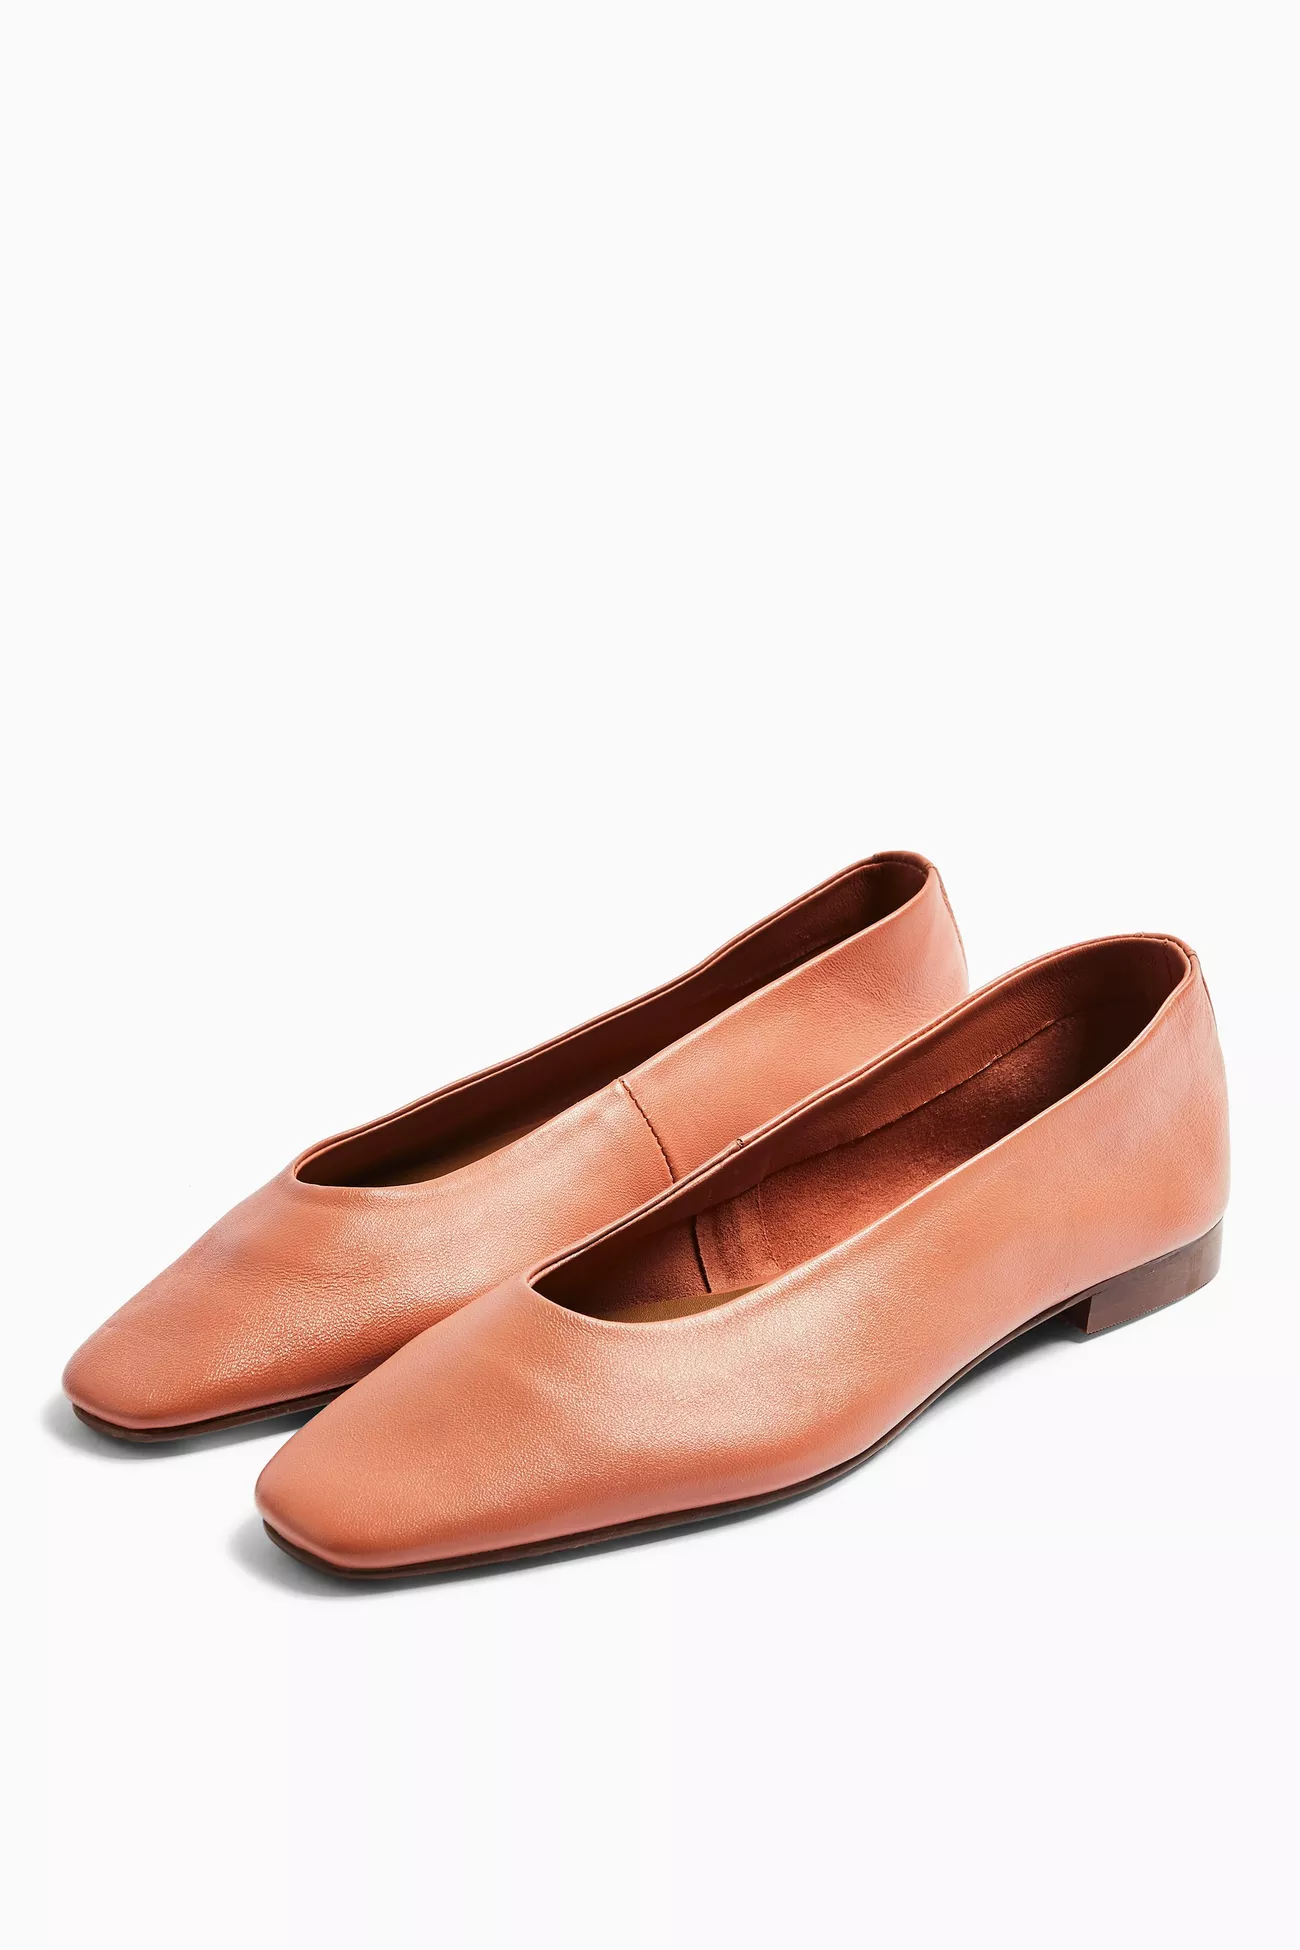 Square-Toe Flats Are Trending—These 